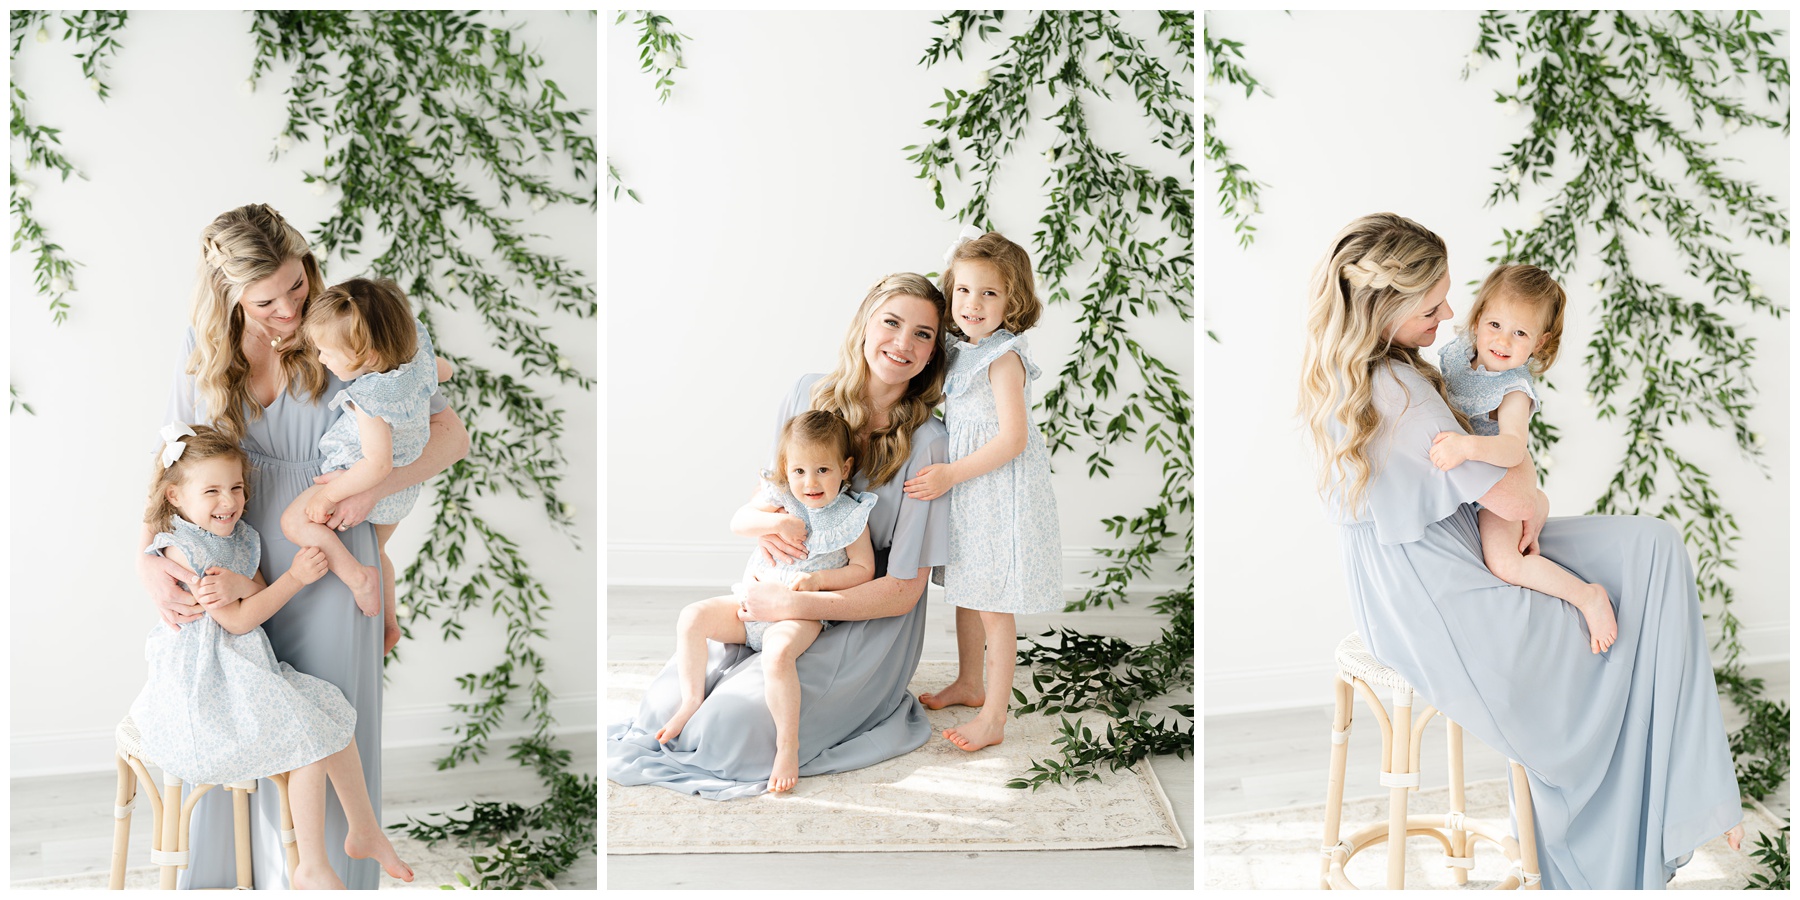 Portraits of a mother with her two daughters.